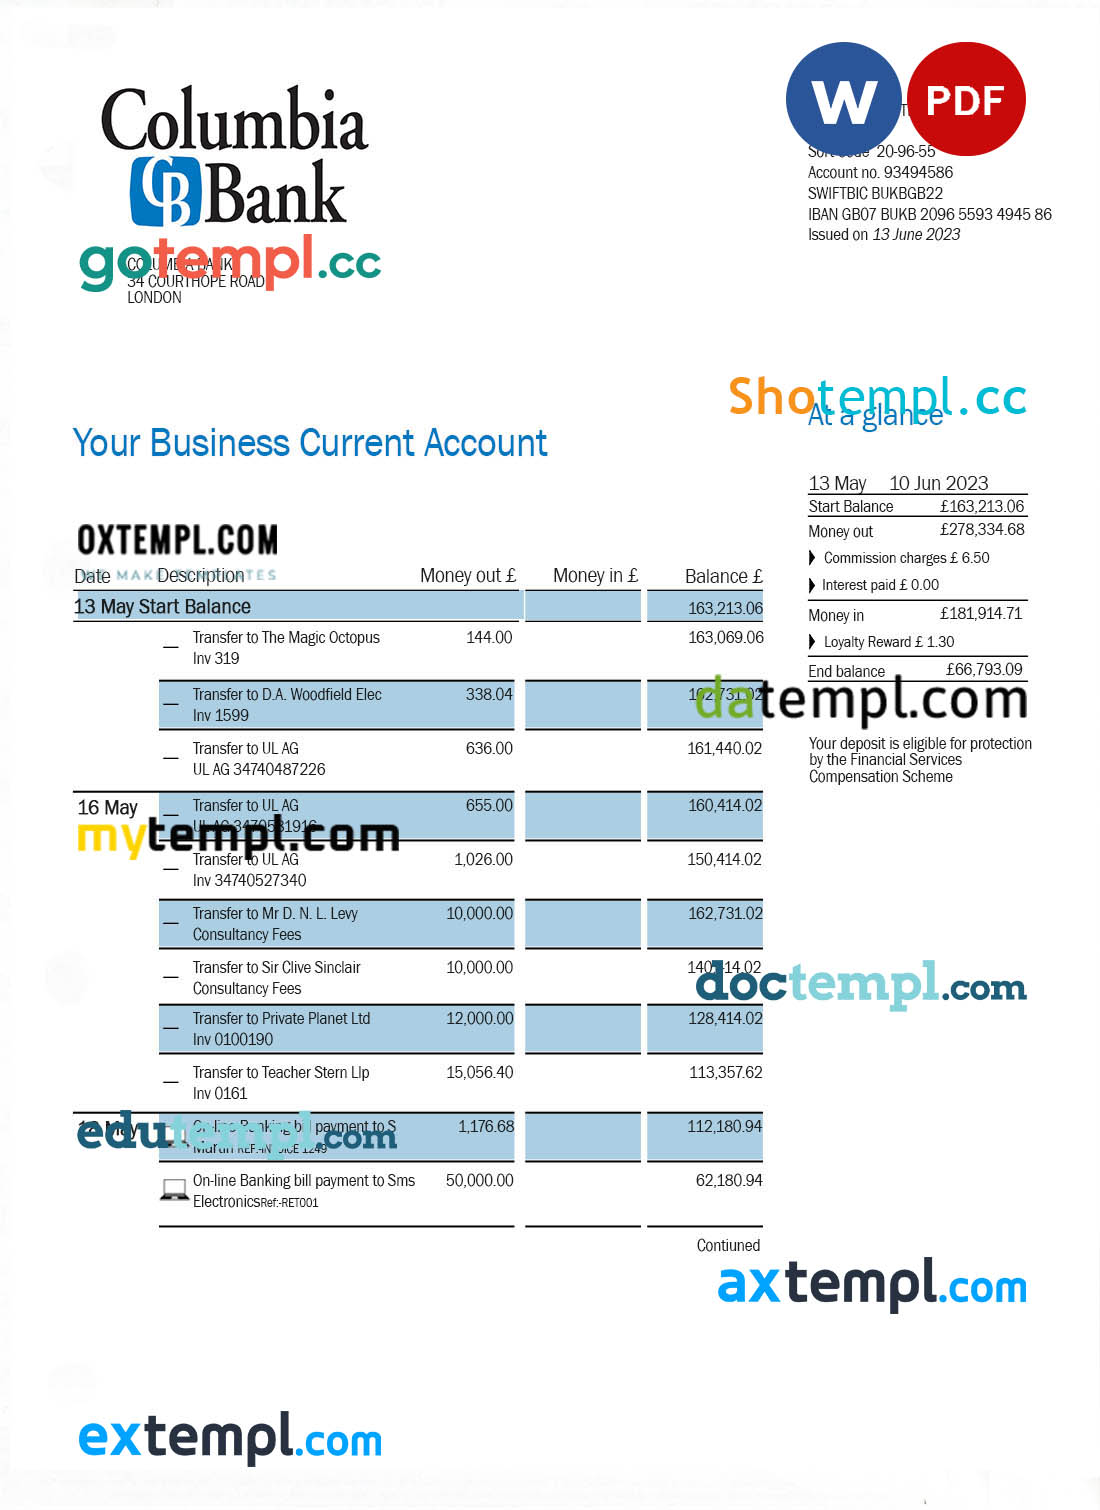 Nigeria GTBank proof of address bank statement template in Word and PDF format